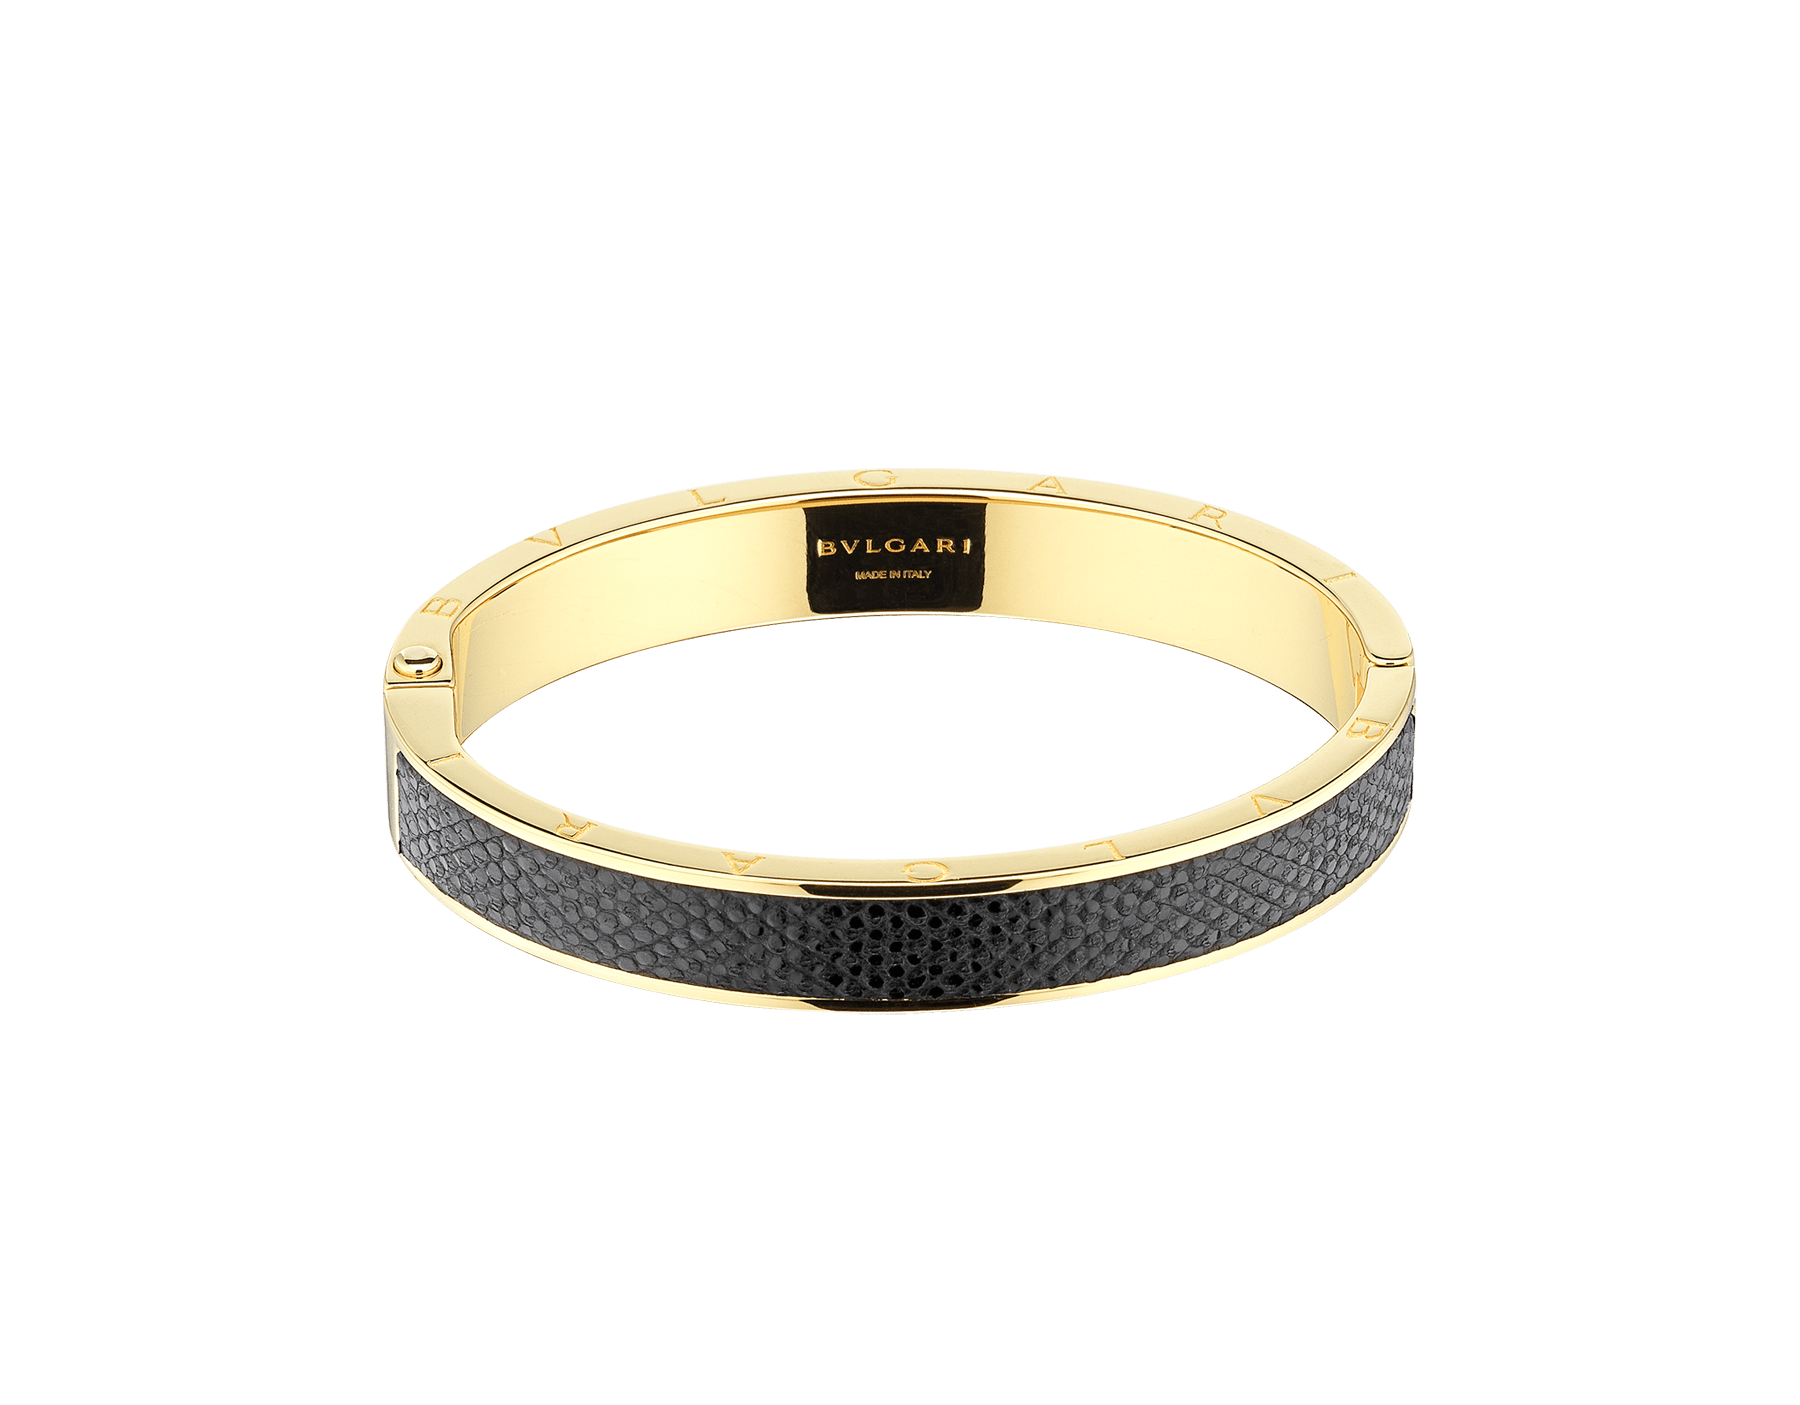 "BVLGARI BVLGARI" bangle bracelet in gold plated brass with a Moon Silver black metallic karung skin insert and a BVLGARI logo hinge closure. Logo engraving along the edges of both sides of the bracelet and in the inner part. HINGELOGOBRCLT-MK-B image 1